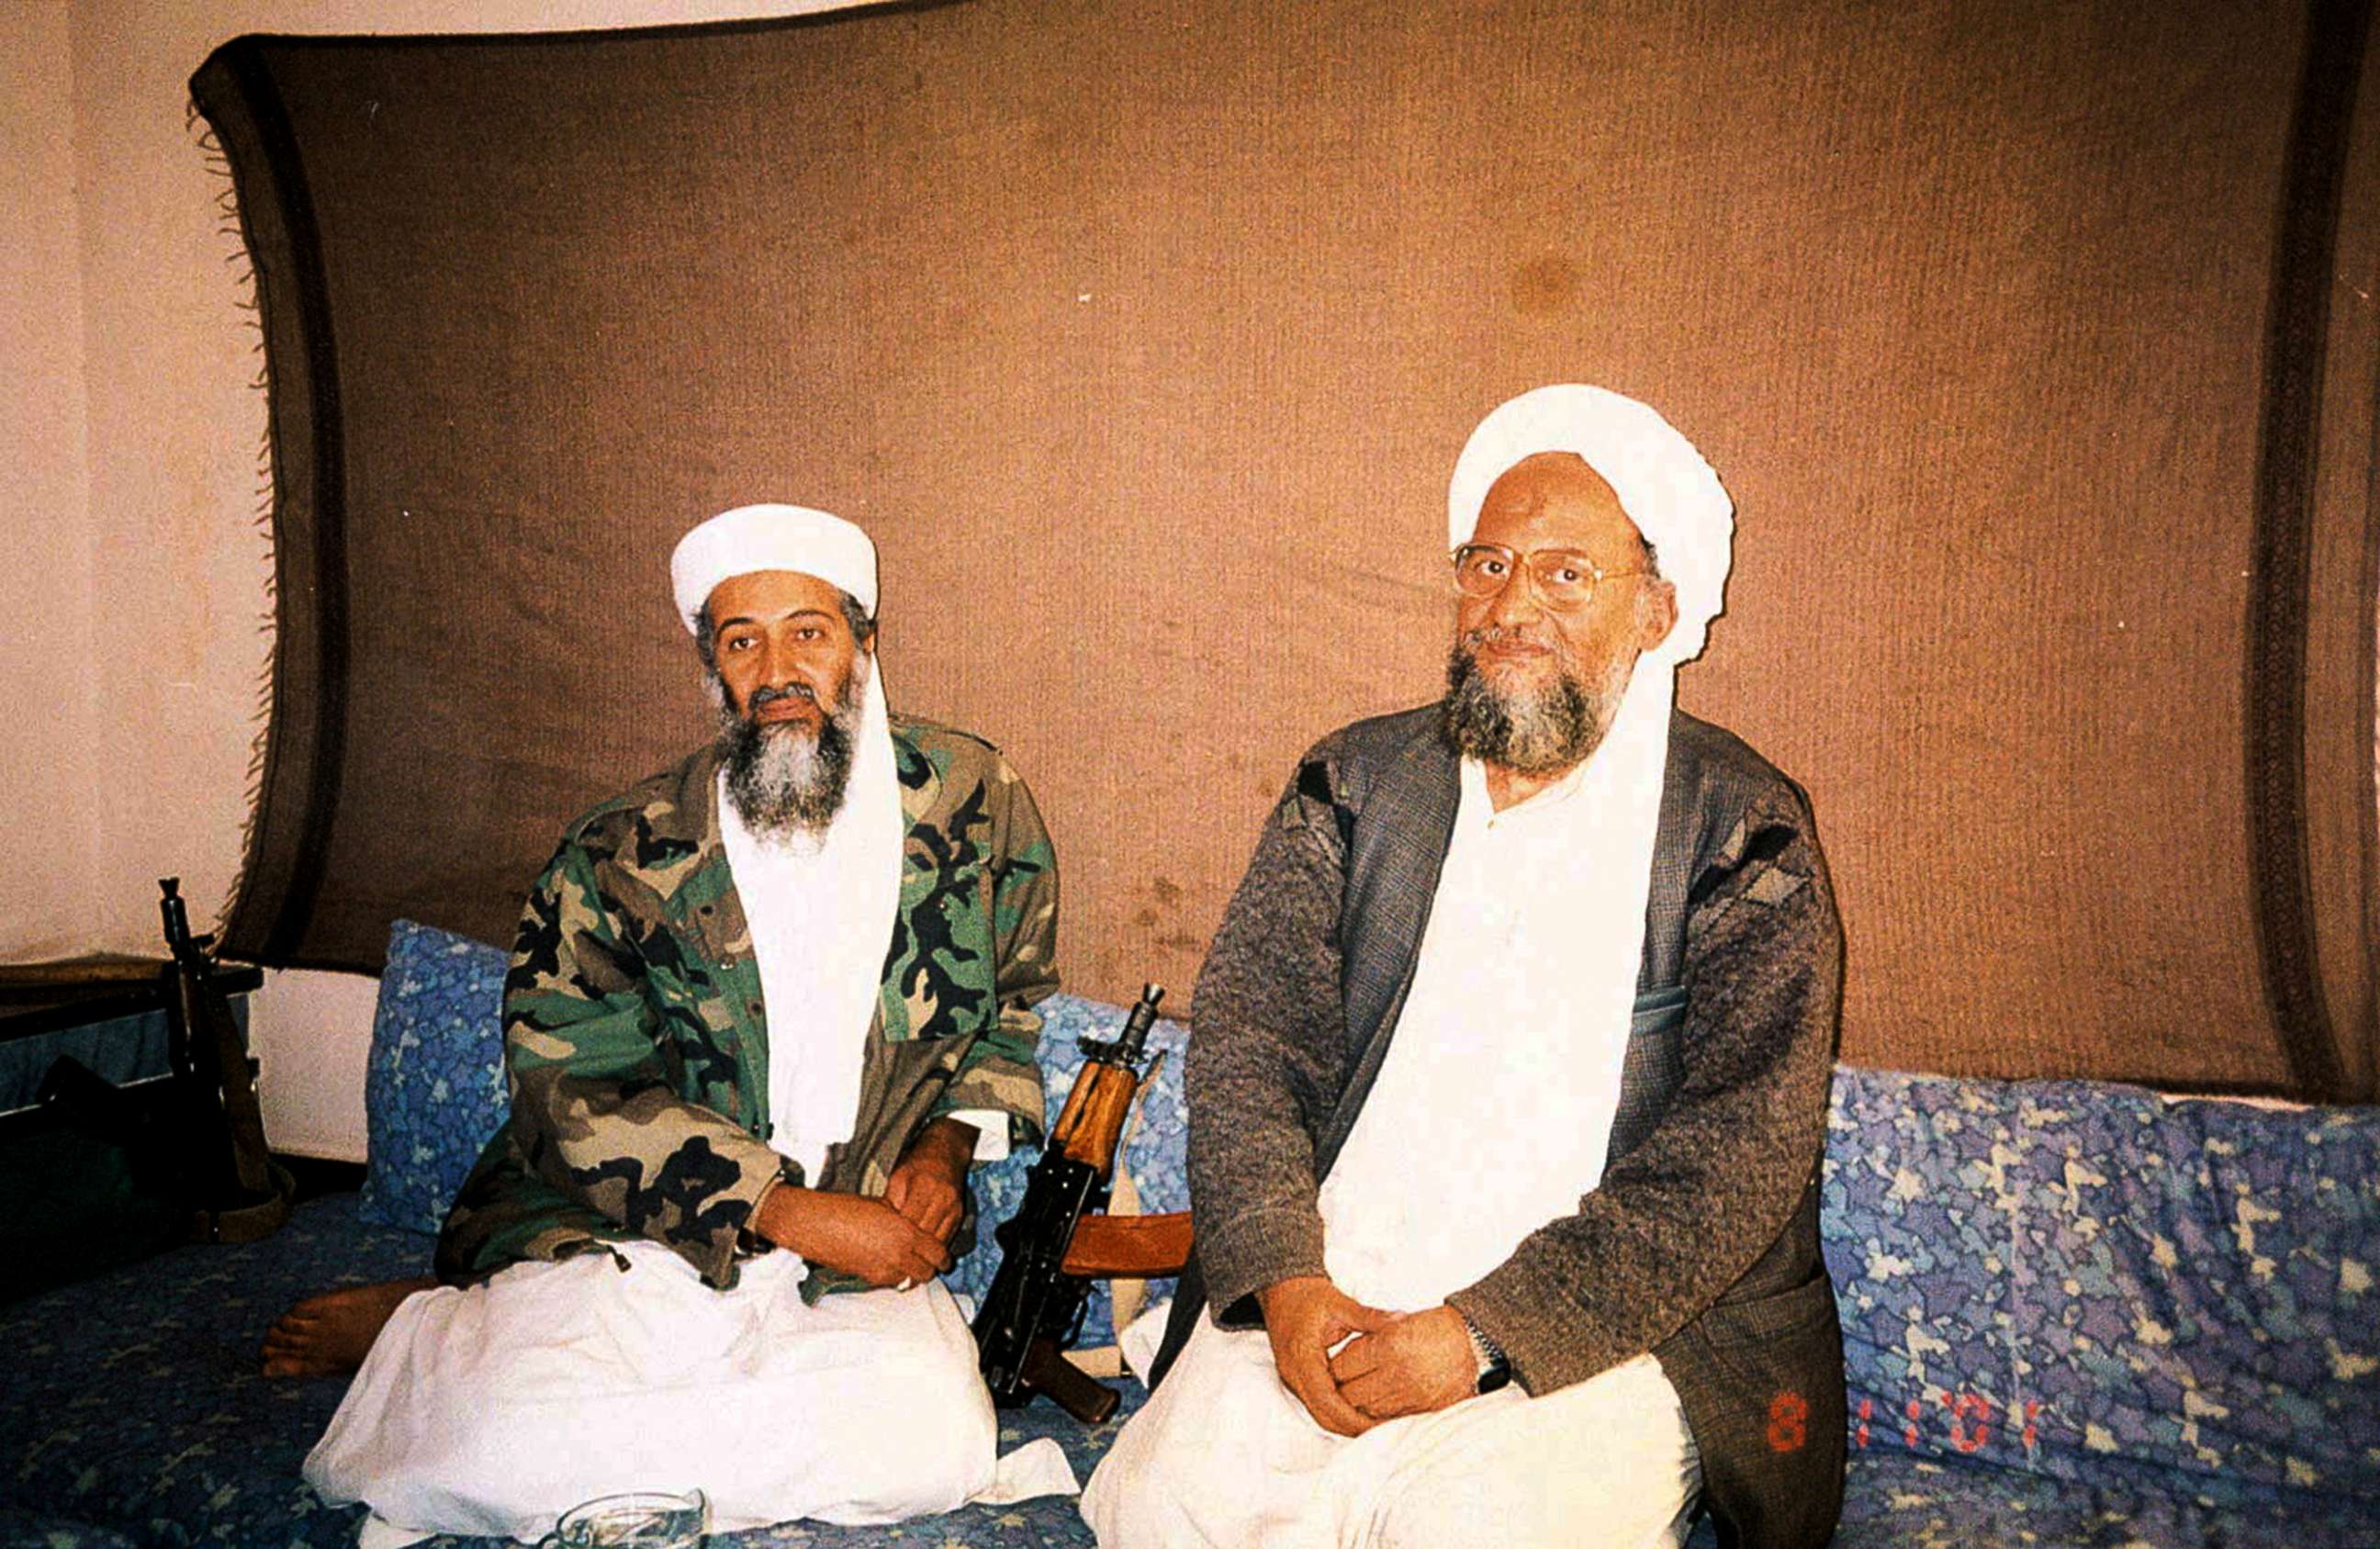 PHOTO: Osama bin Laden sits with his adviser Ayman al-Zawahiri, an Egyptian linked to the al Qaeda network, during an interview with Pakistani journalist Hamid Mir in an image supplied by Dawn newspaper Nov. 10, 2001. 